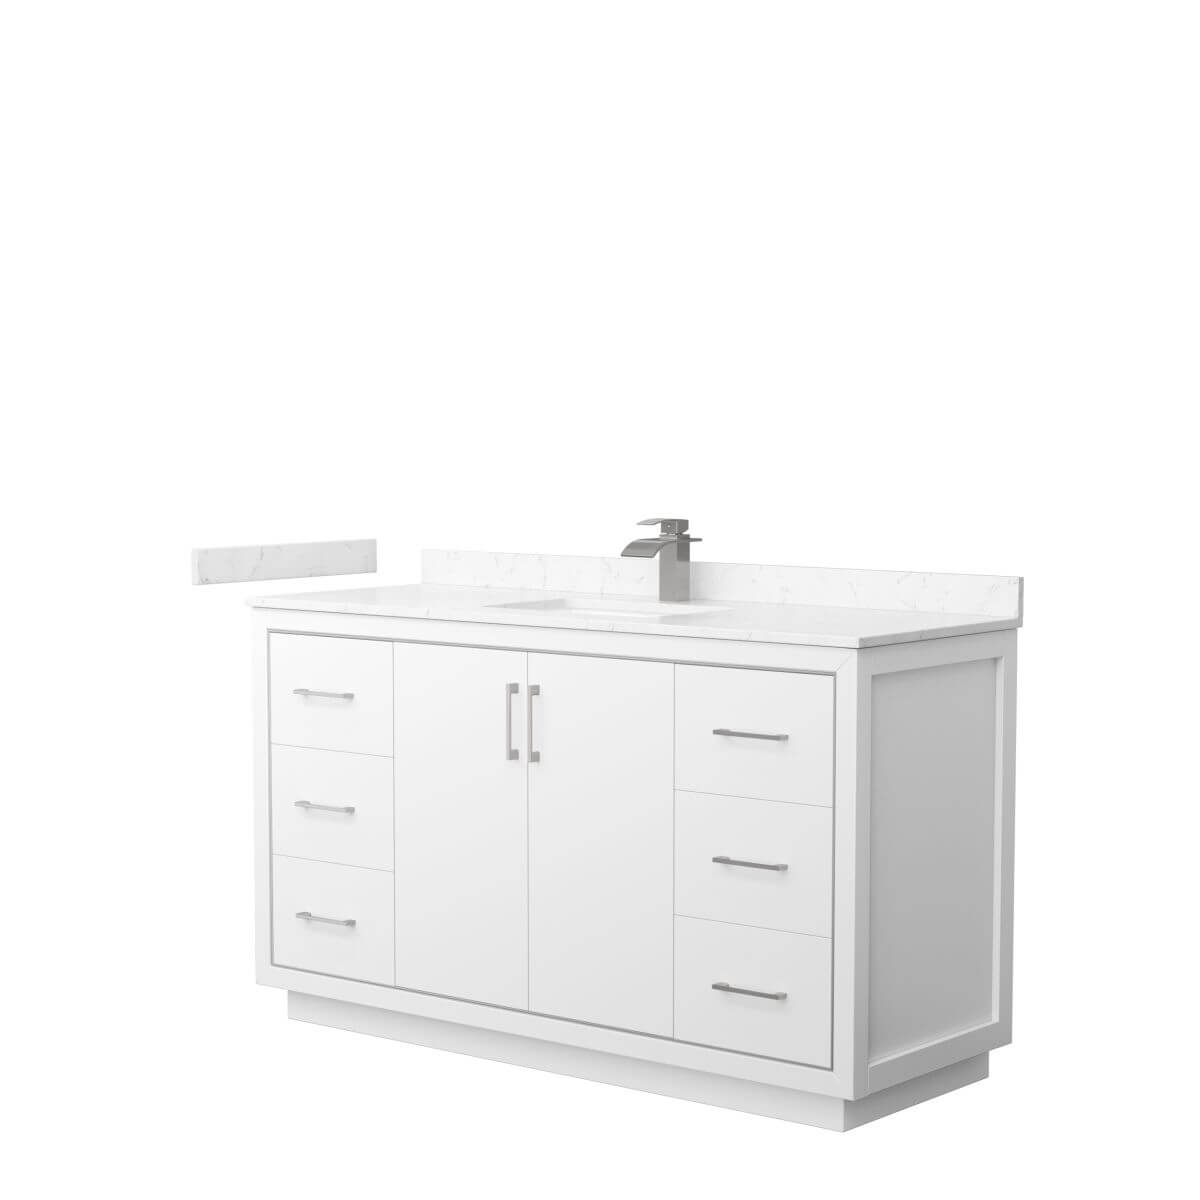 Wyndham Collection WCF111160SWHC2UNSMXX Icon 60 inch Single Bathroom Vanity in White with Carrara Cultured Marble Countertop, Undermount Square Sink and Brushed Nickel Trim